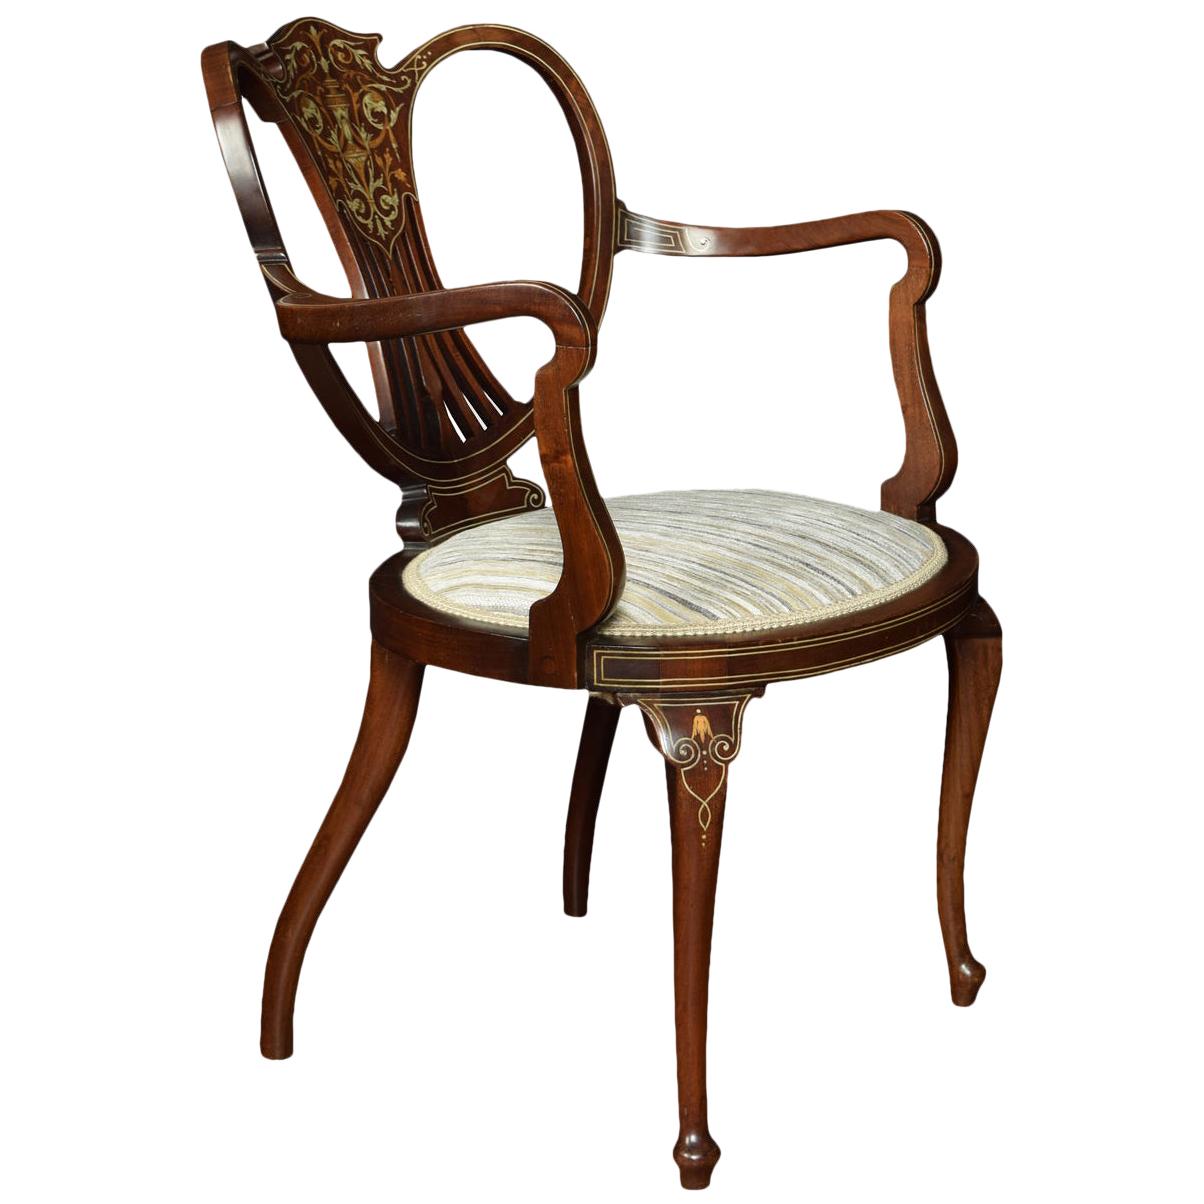 Early 20th Century Inlaid Armchair